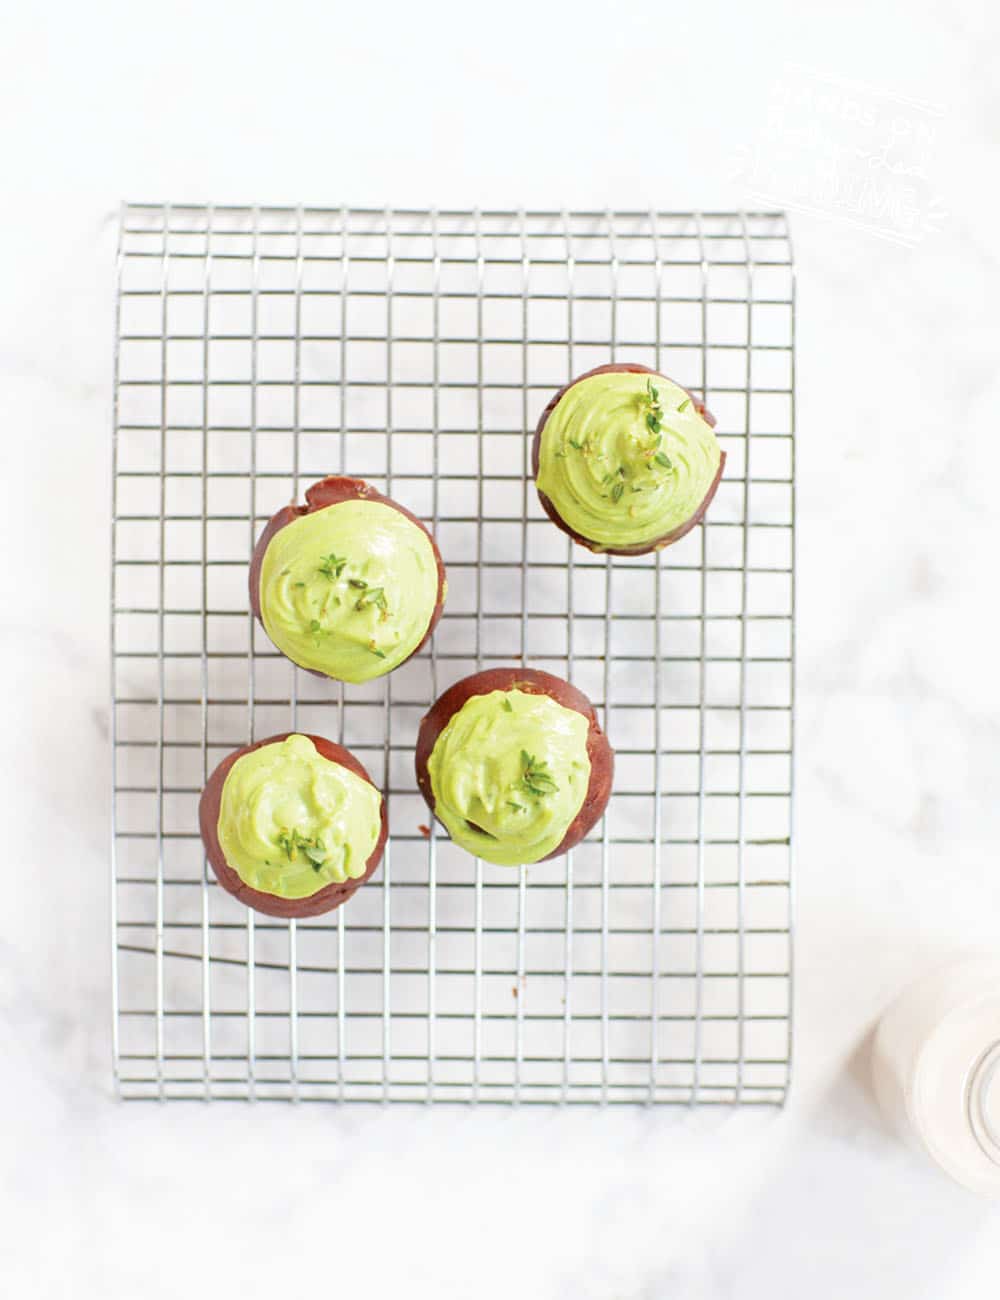 Chocolate Muffins with Green Frosting Recipe Images2